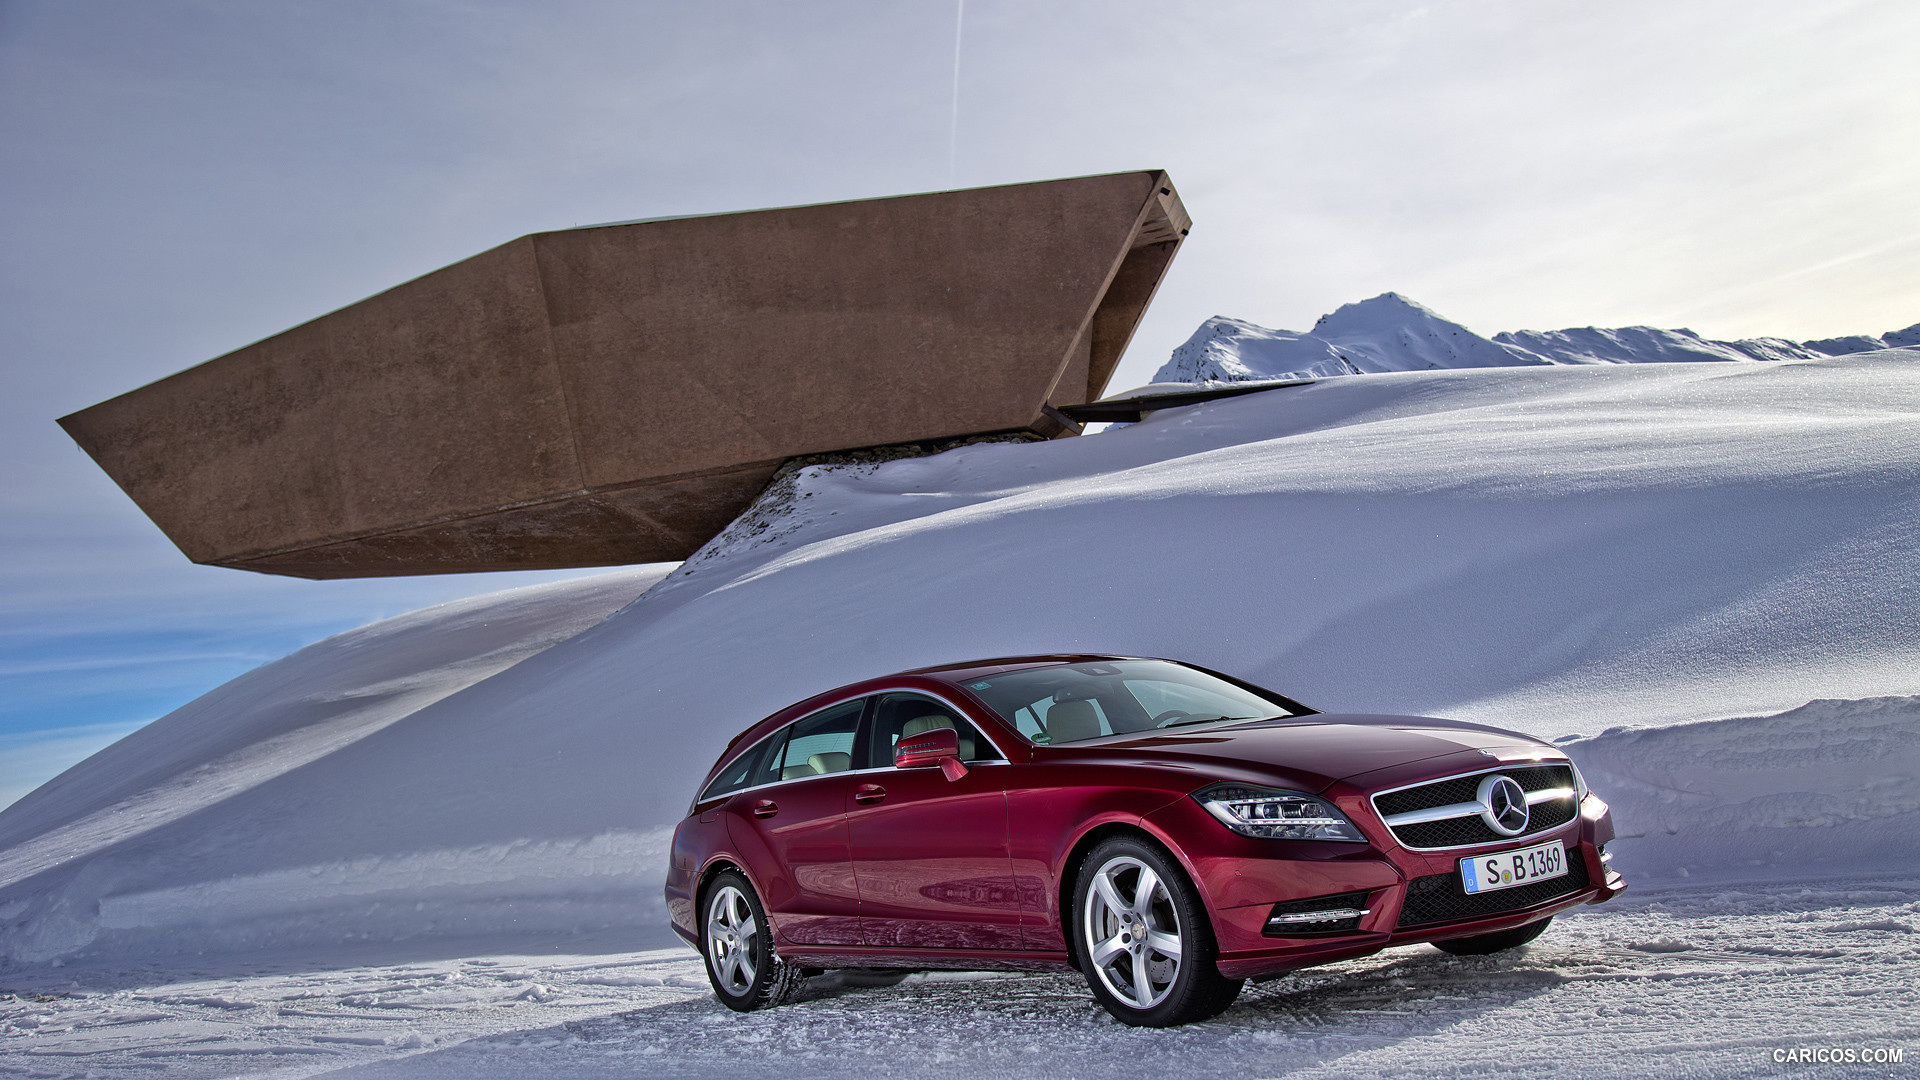 2013 Mercedes-Benz CLS 500 4MATIC Shooting Brake on Snow - Front, #157 of 184